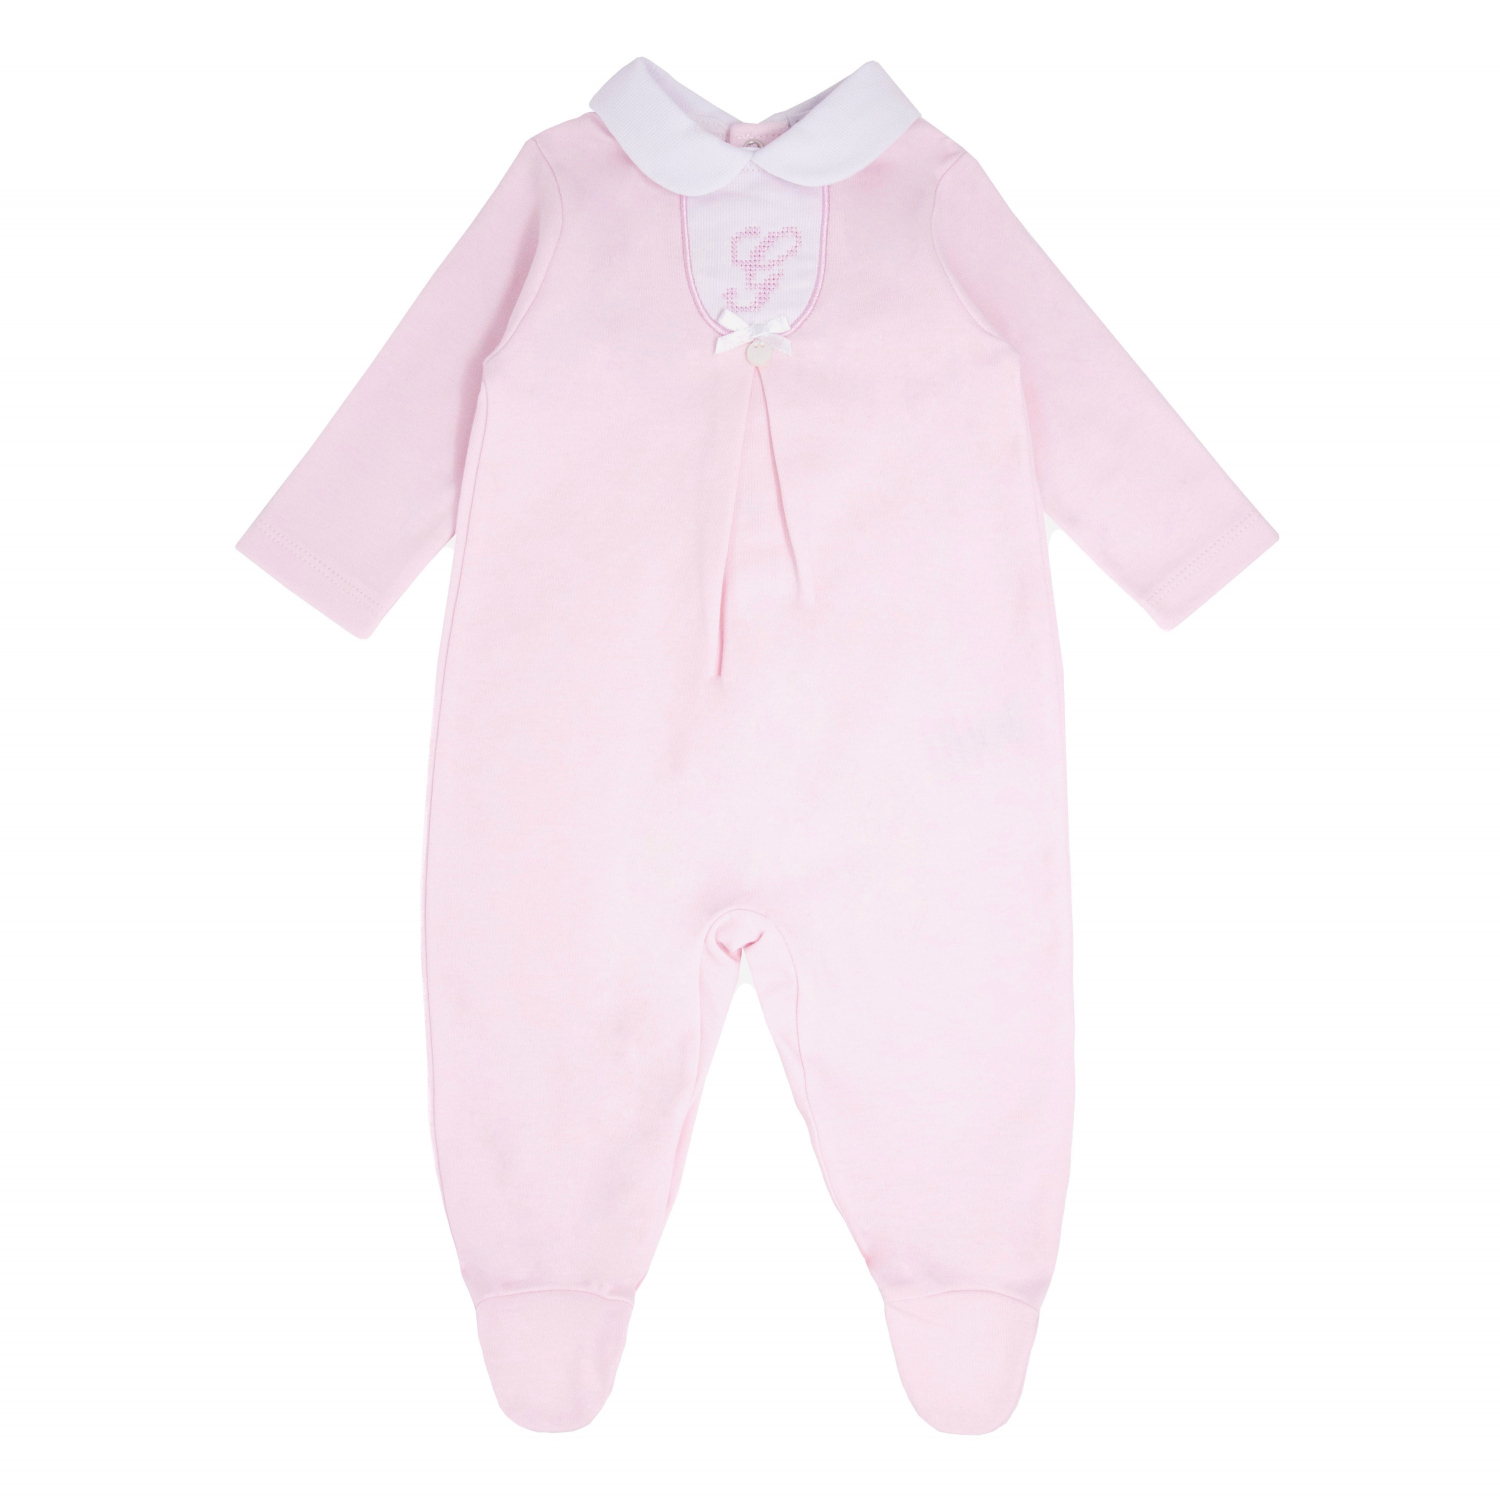 Klassisches schickes Baby-Outfit